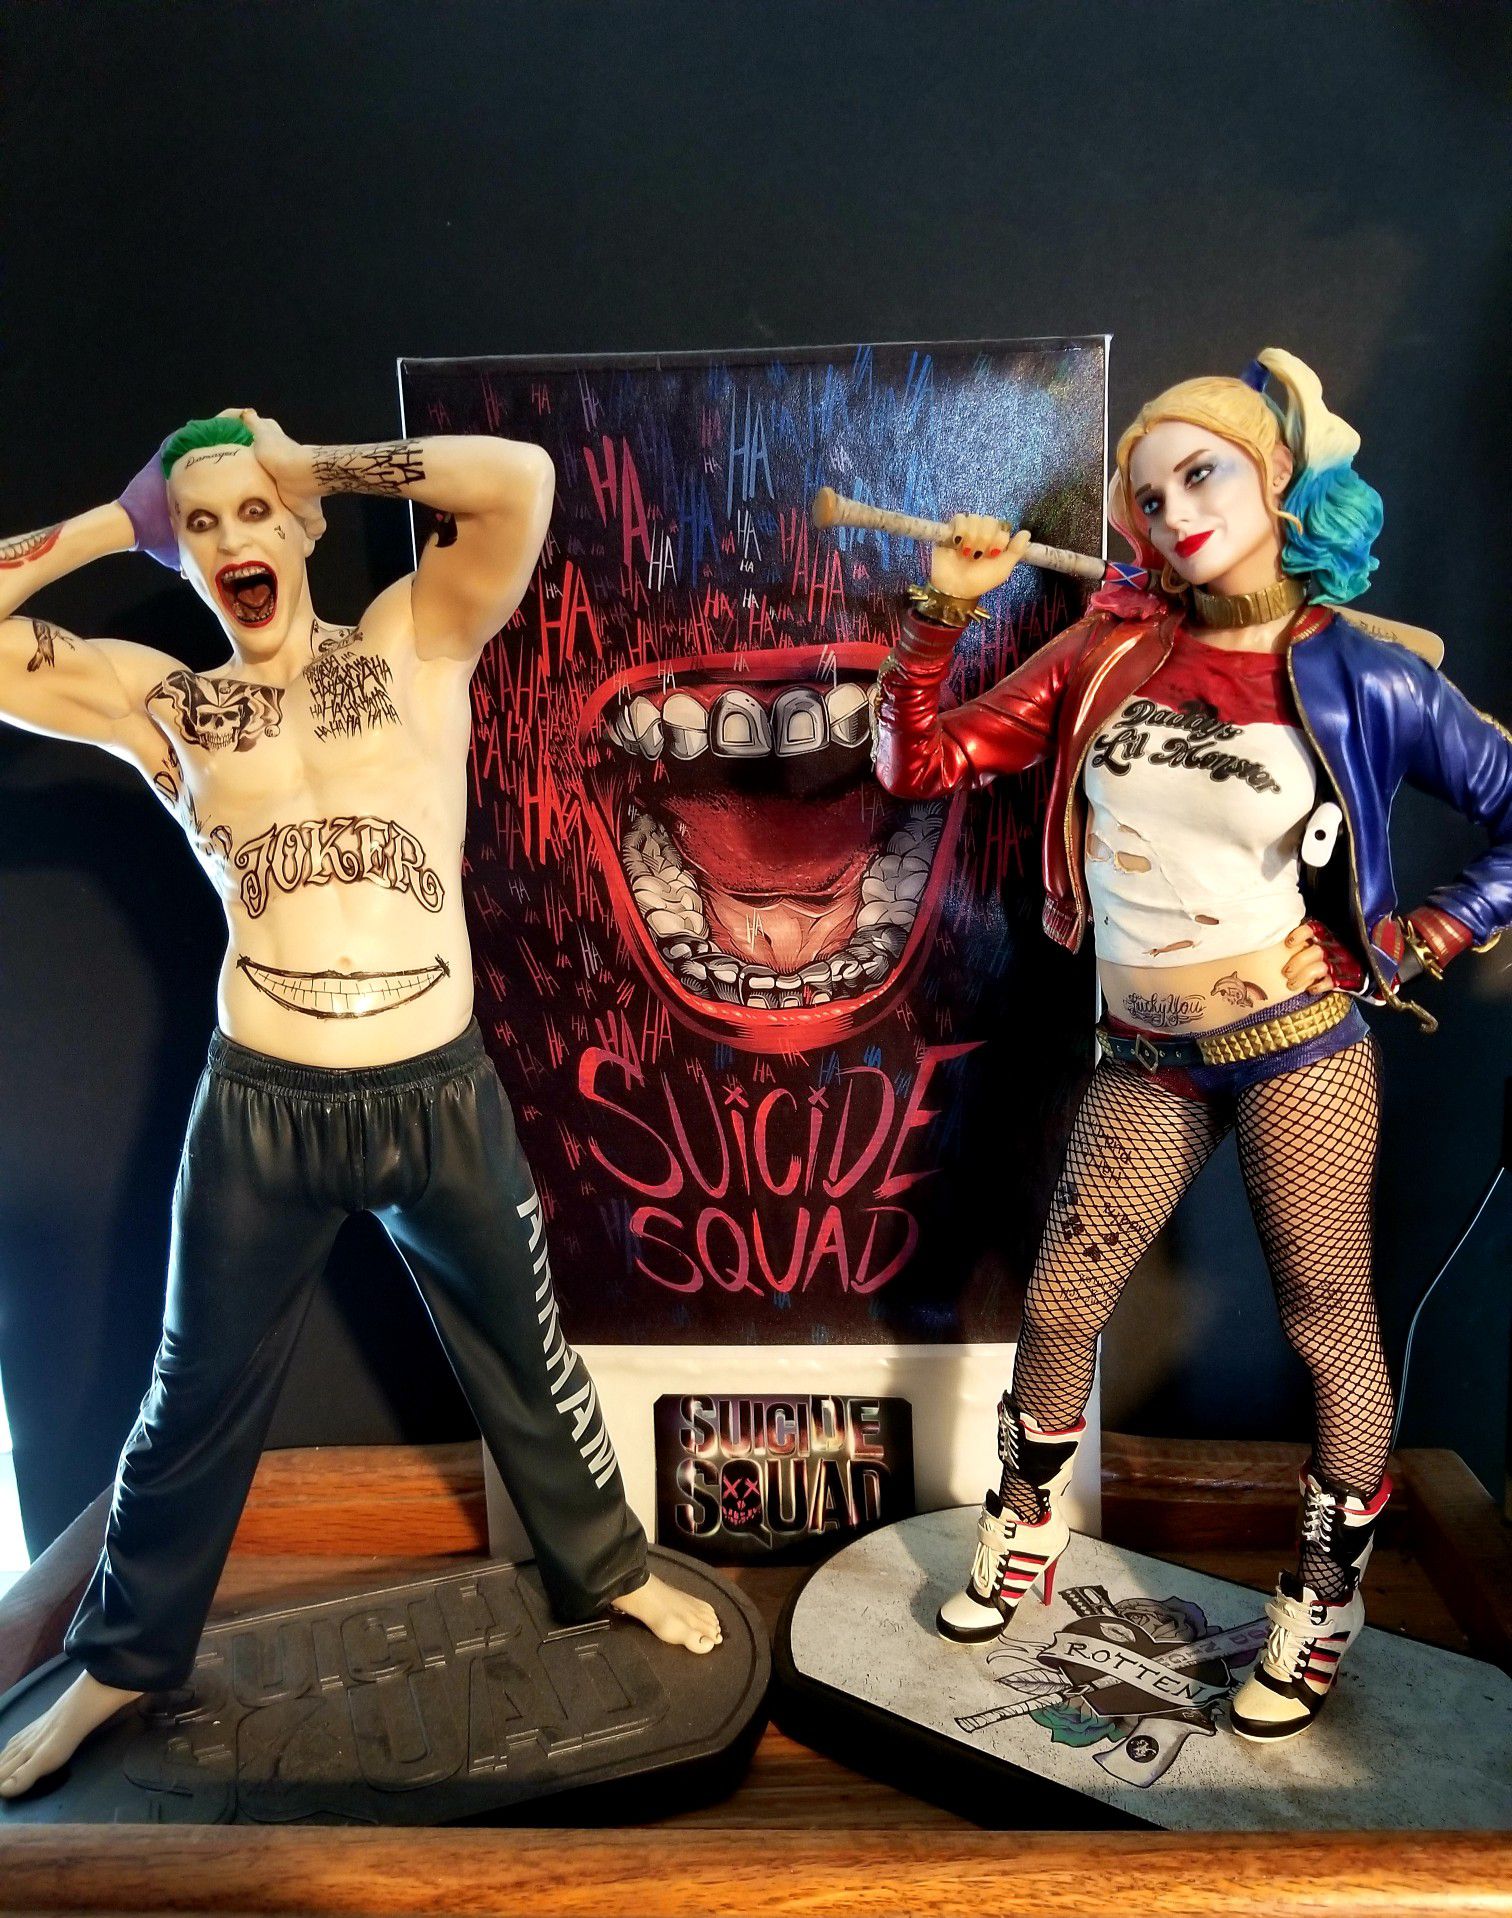 Harley Quinn Suicide Squad Joker not Hot Toys DC collectibles original Flawless like new with Packaging